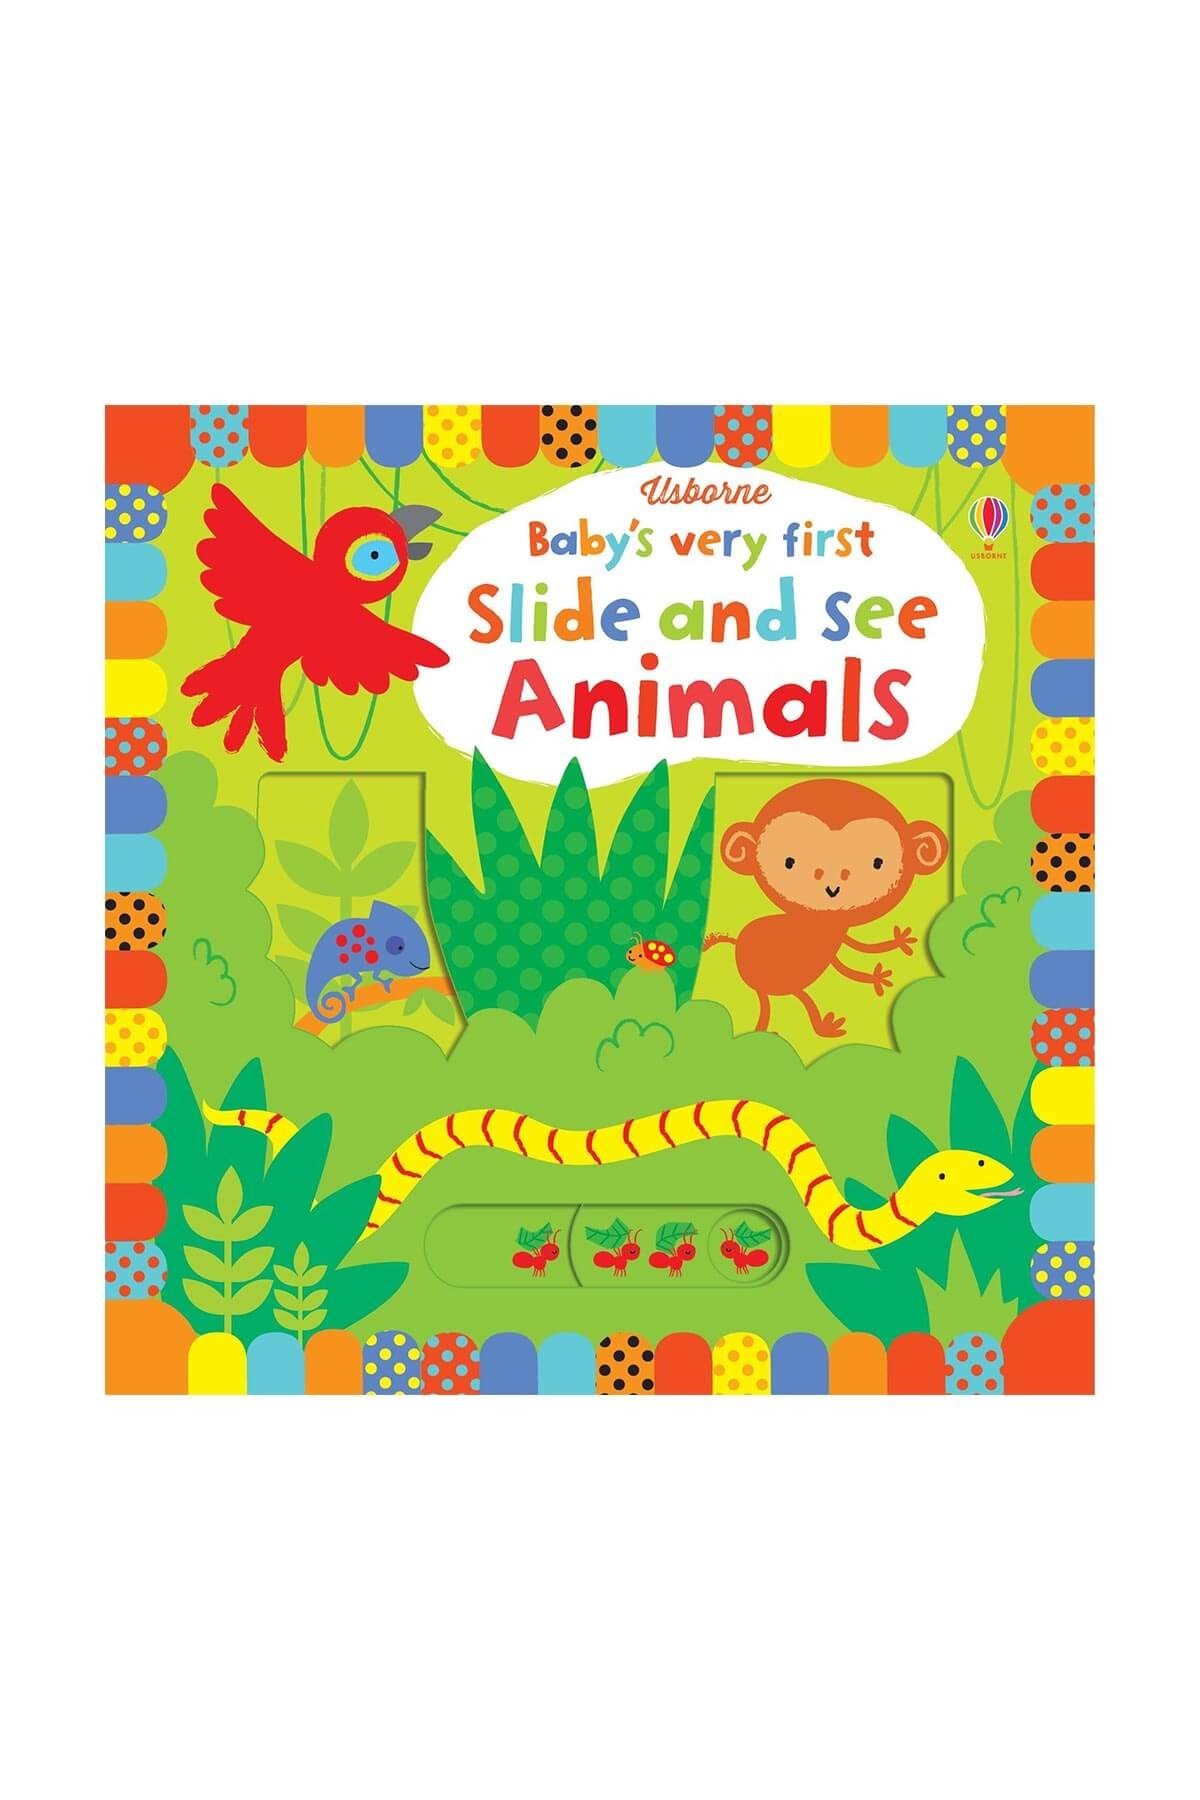 The Usborne Slide and See Animals